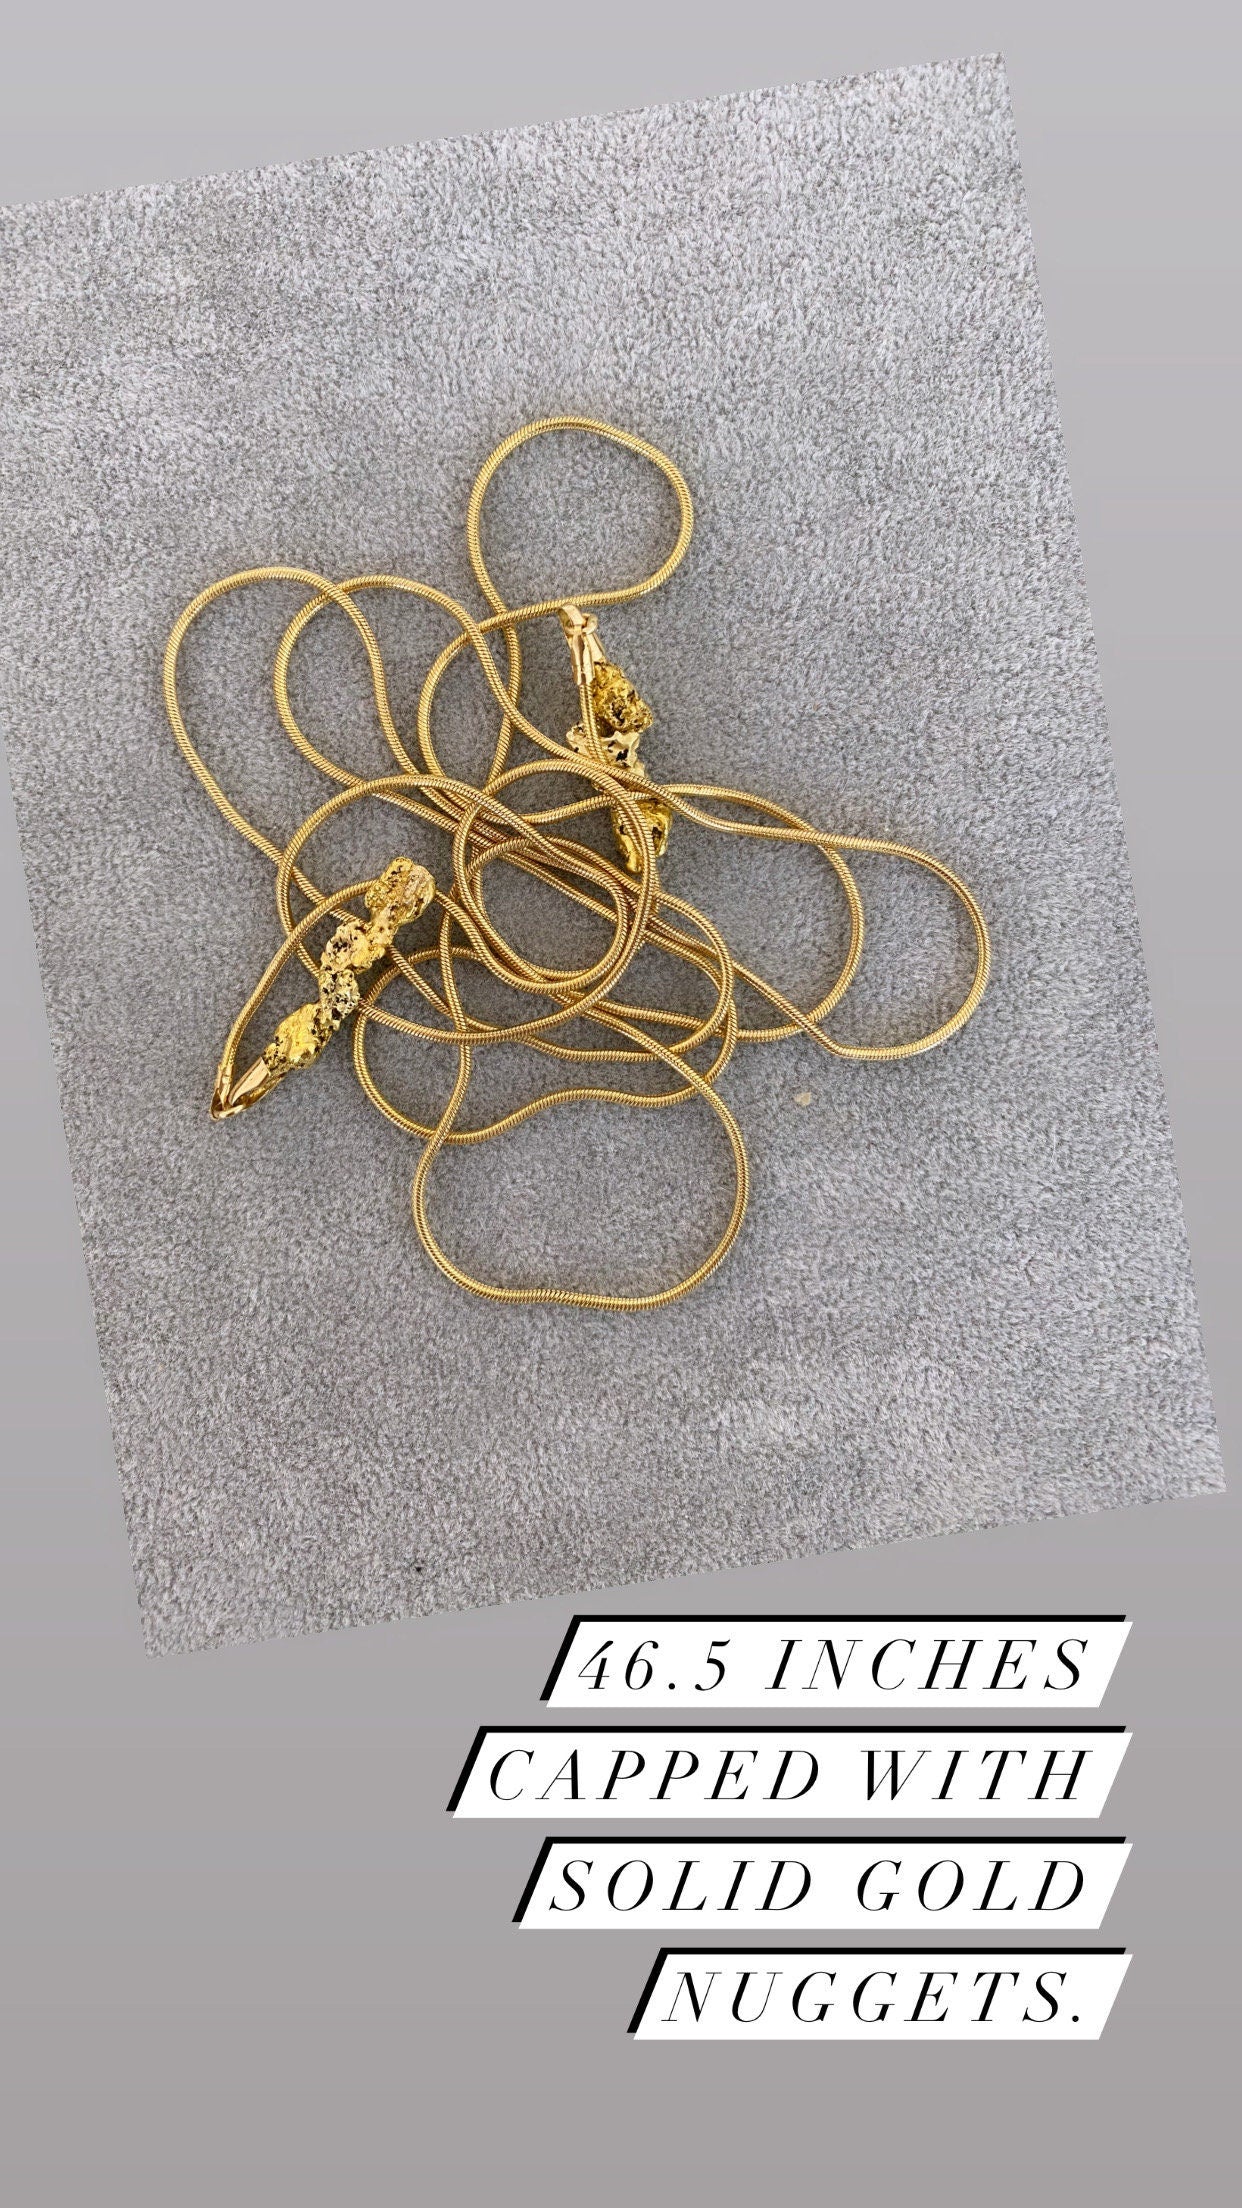 Vintage Italian 14K Yellow Gold Snake Chain Lariat with Gold Nugget Ends, 46.5 inches.